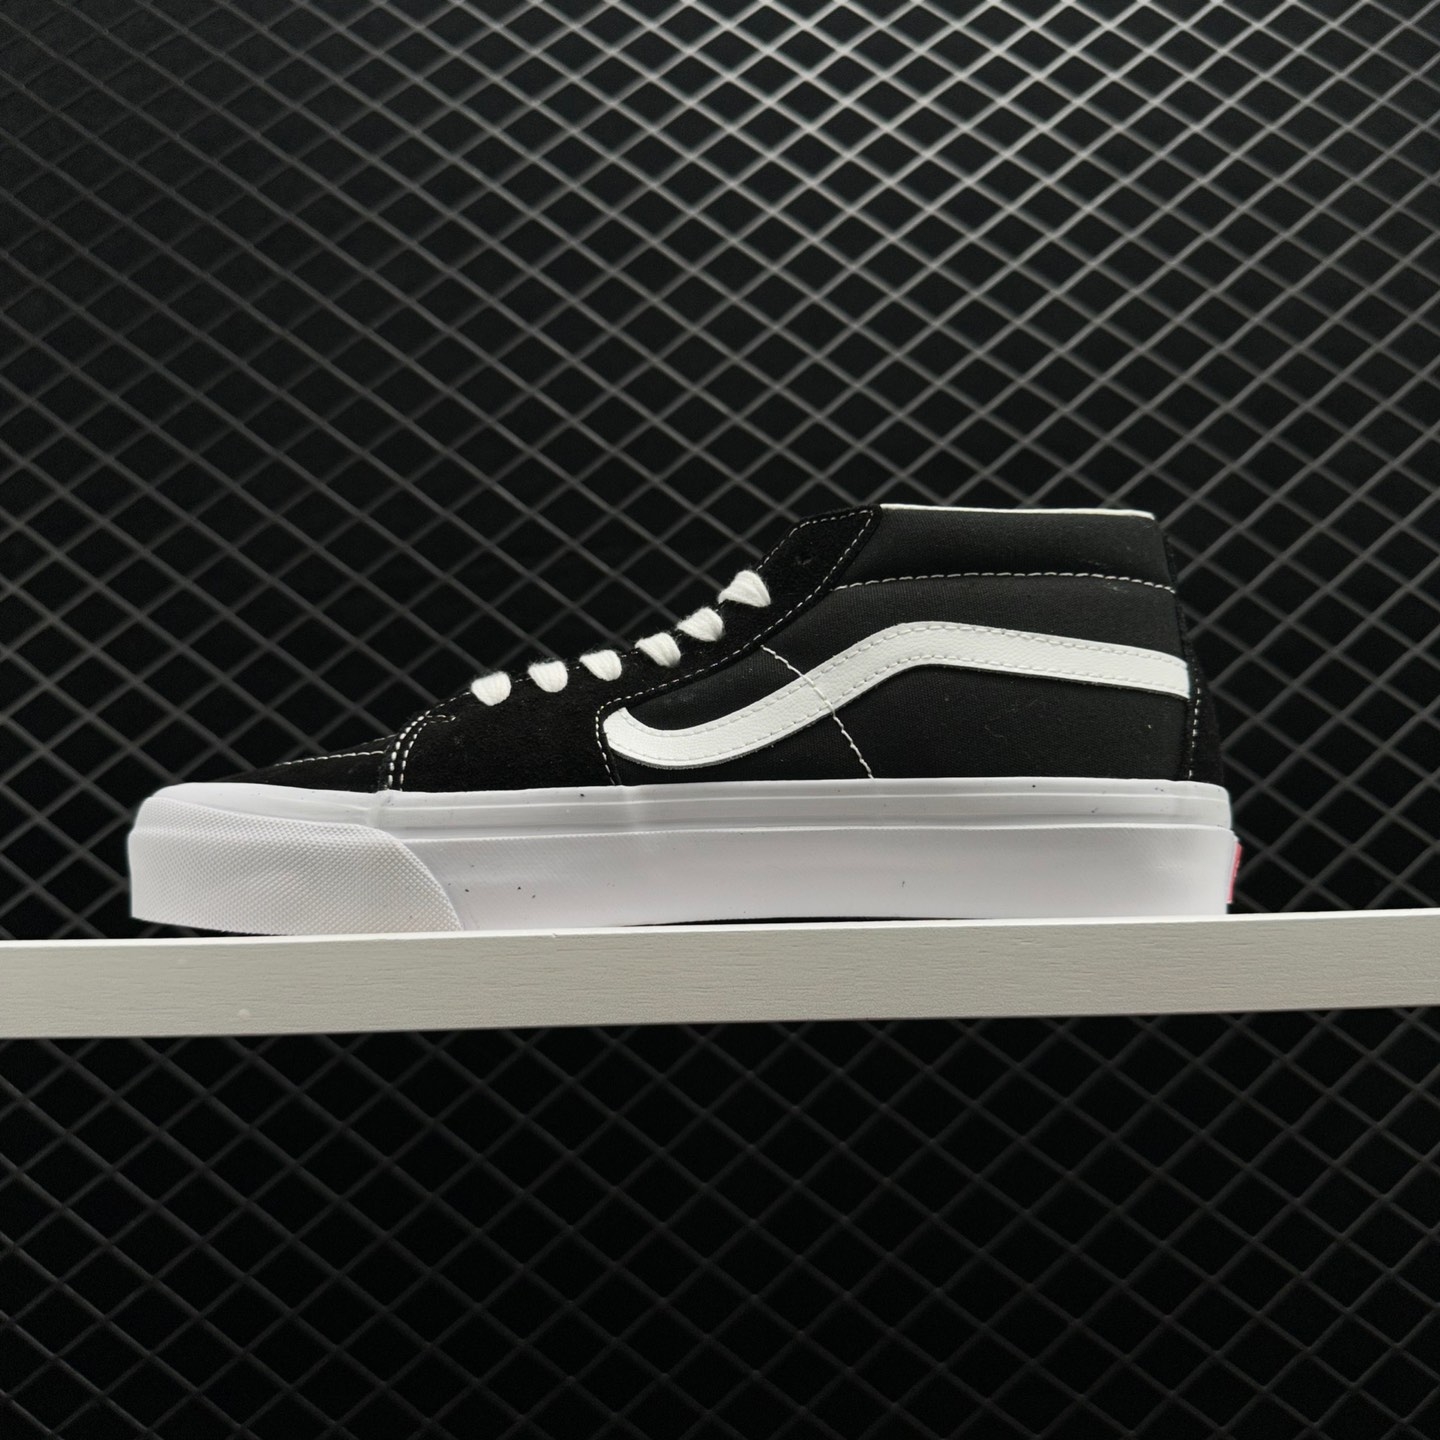 Vans Vaults Sk8-Mid OG LX 'Black White' VN0A4BVCBA2 - Classic Style and Quality